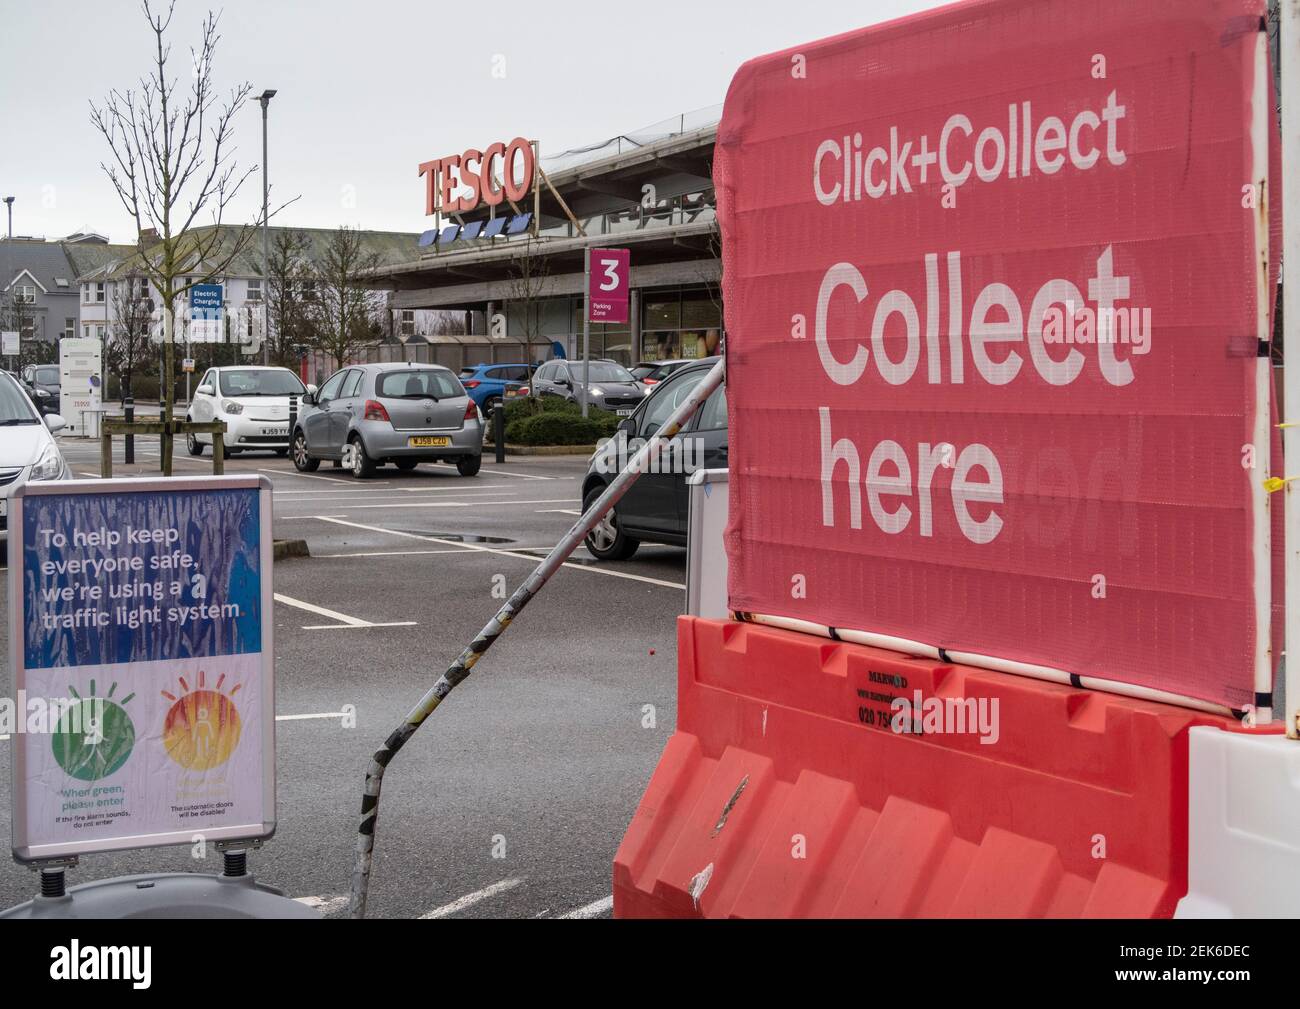 Click and collect at a Tesco supermarket in Seaton, Devon. Food delivery and collect systems have been in great demand during the Covid pandemic. Stock Photo